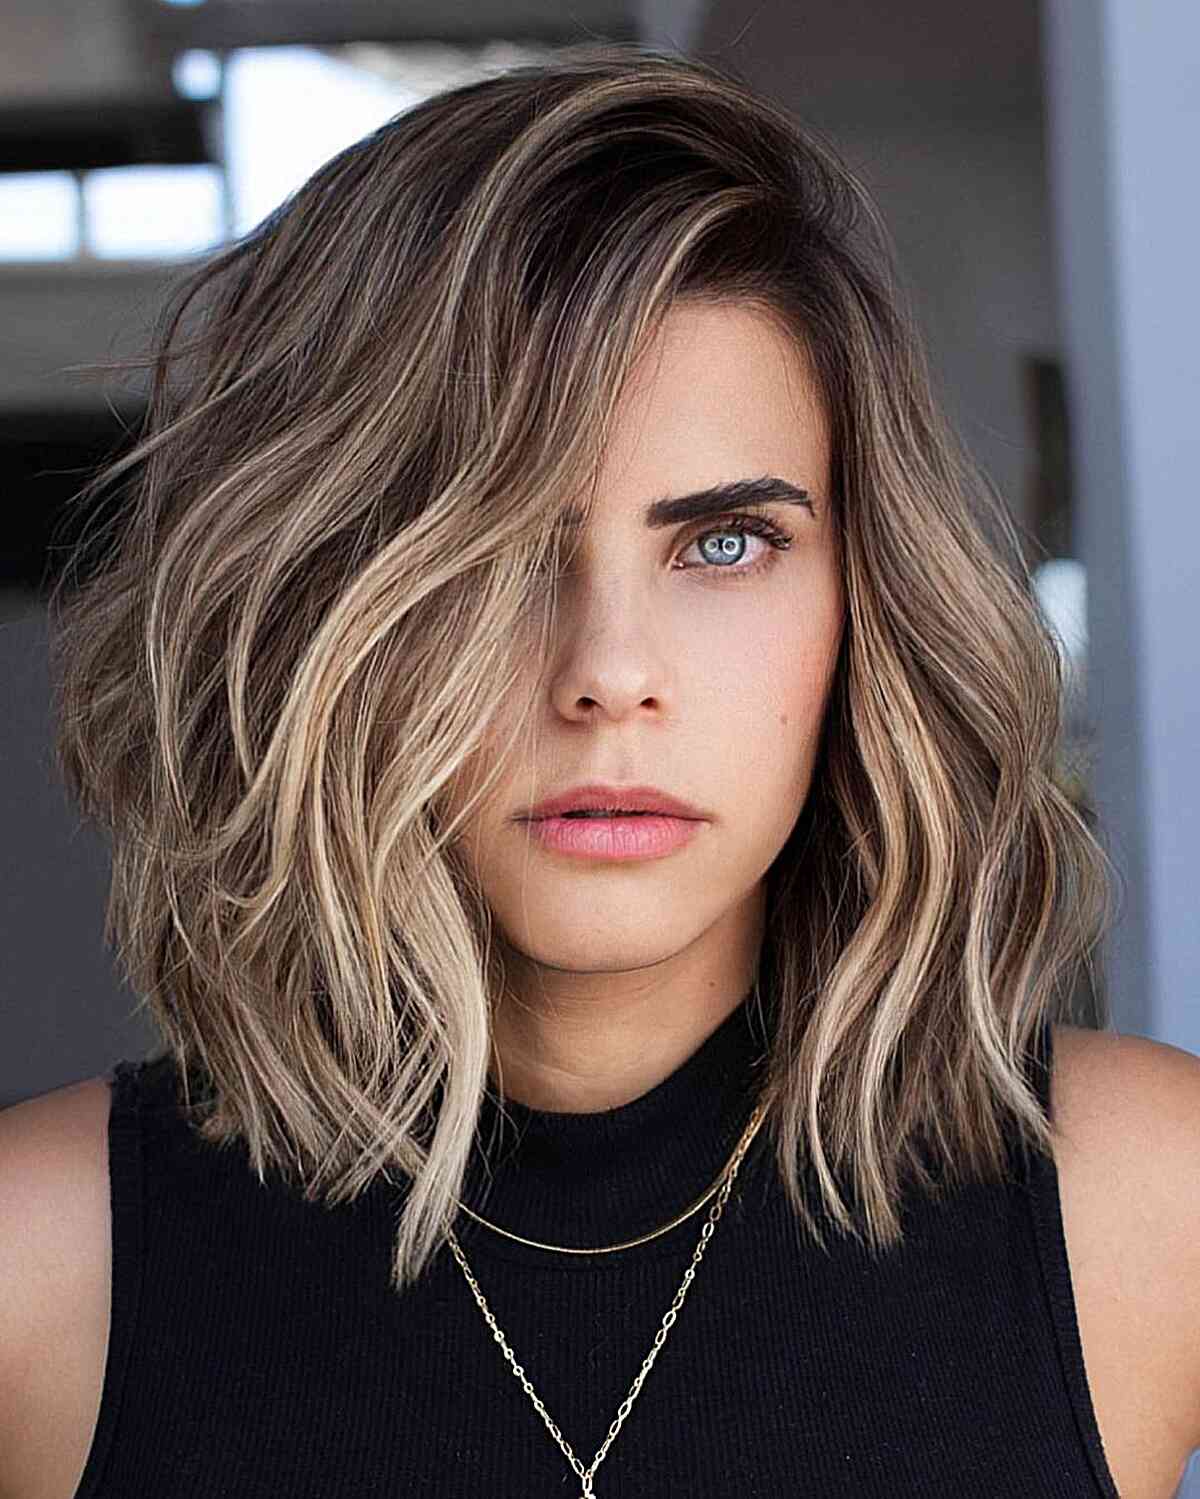 Contrasted Bronde Hair with a Deep Side Part